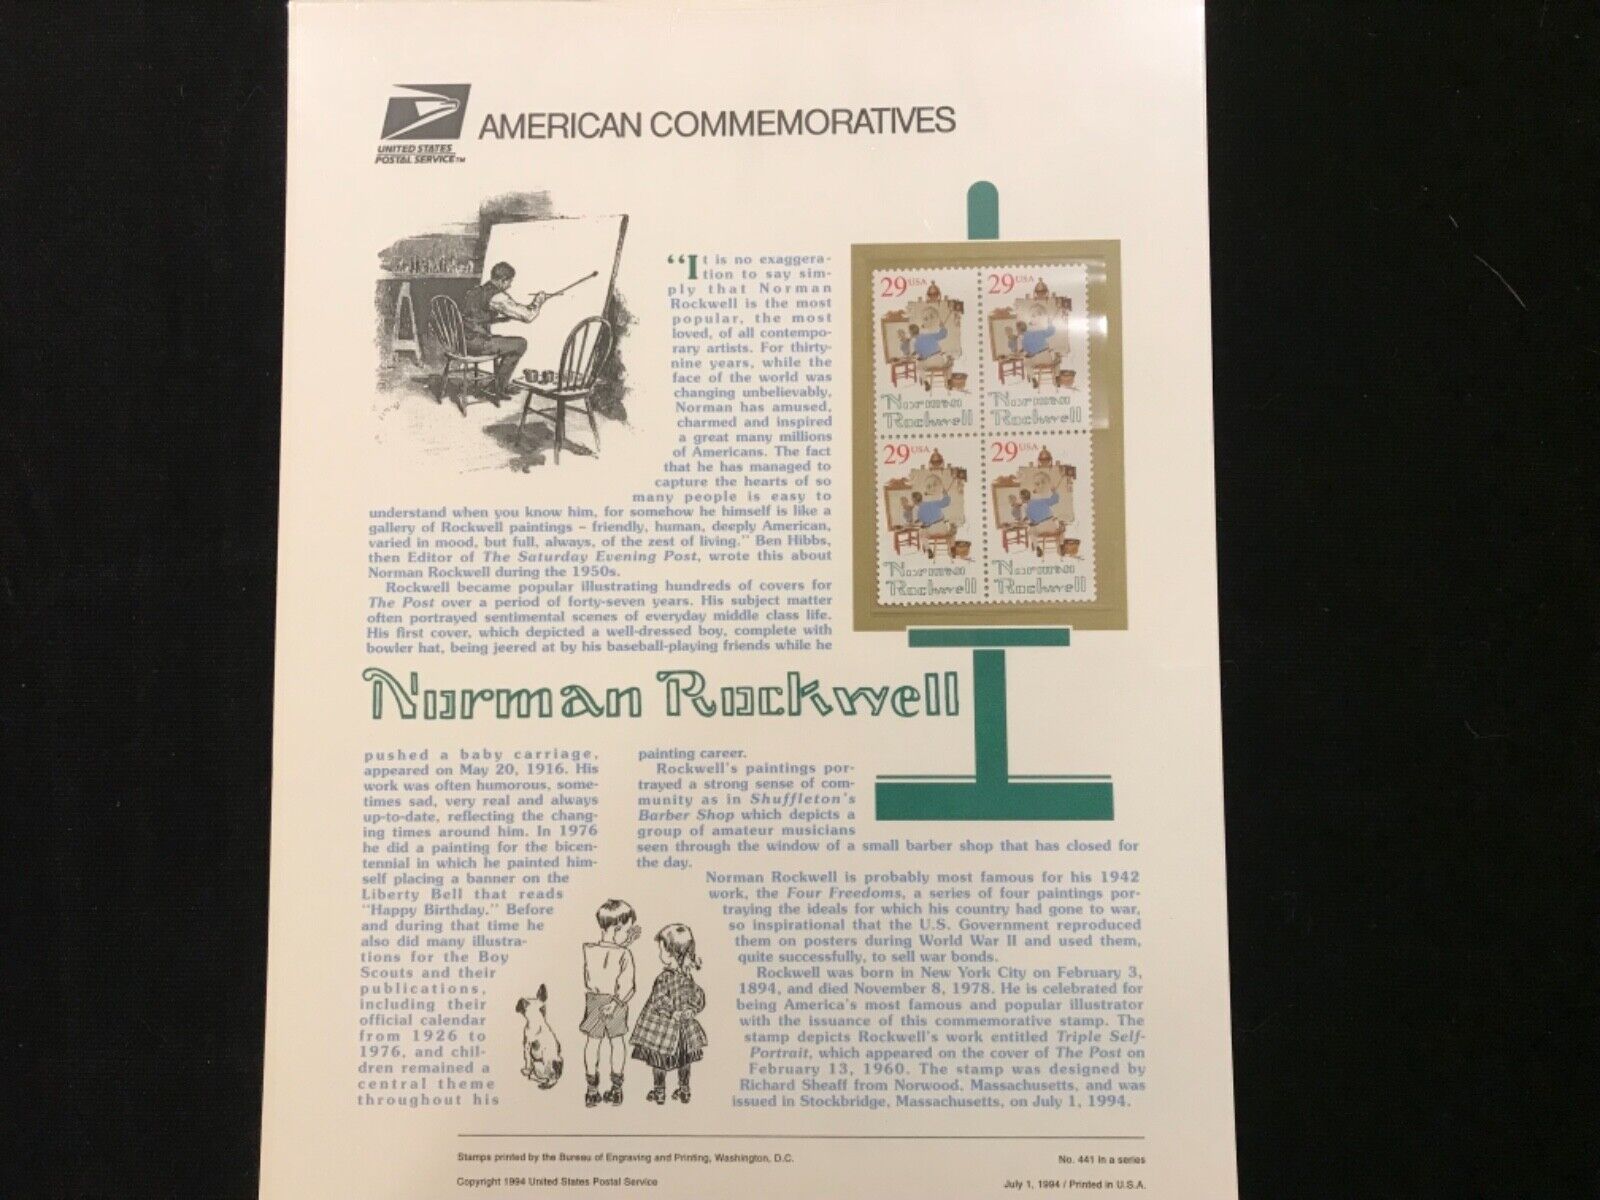 #2839   29c NORMAN ROCKWELL USPS # 441 Commemorative Stamp Panel